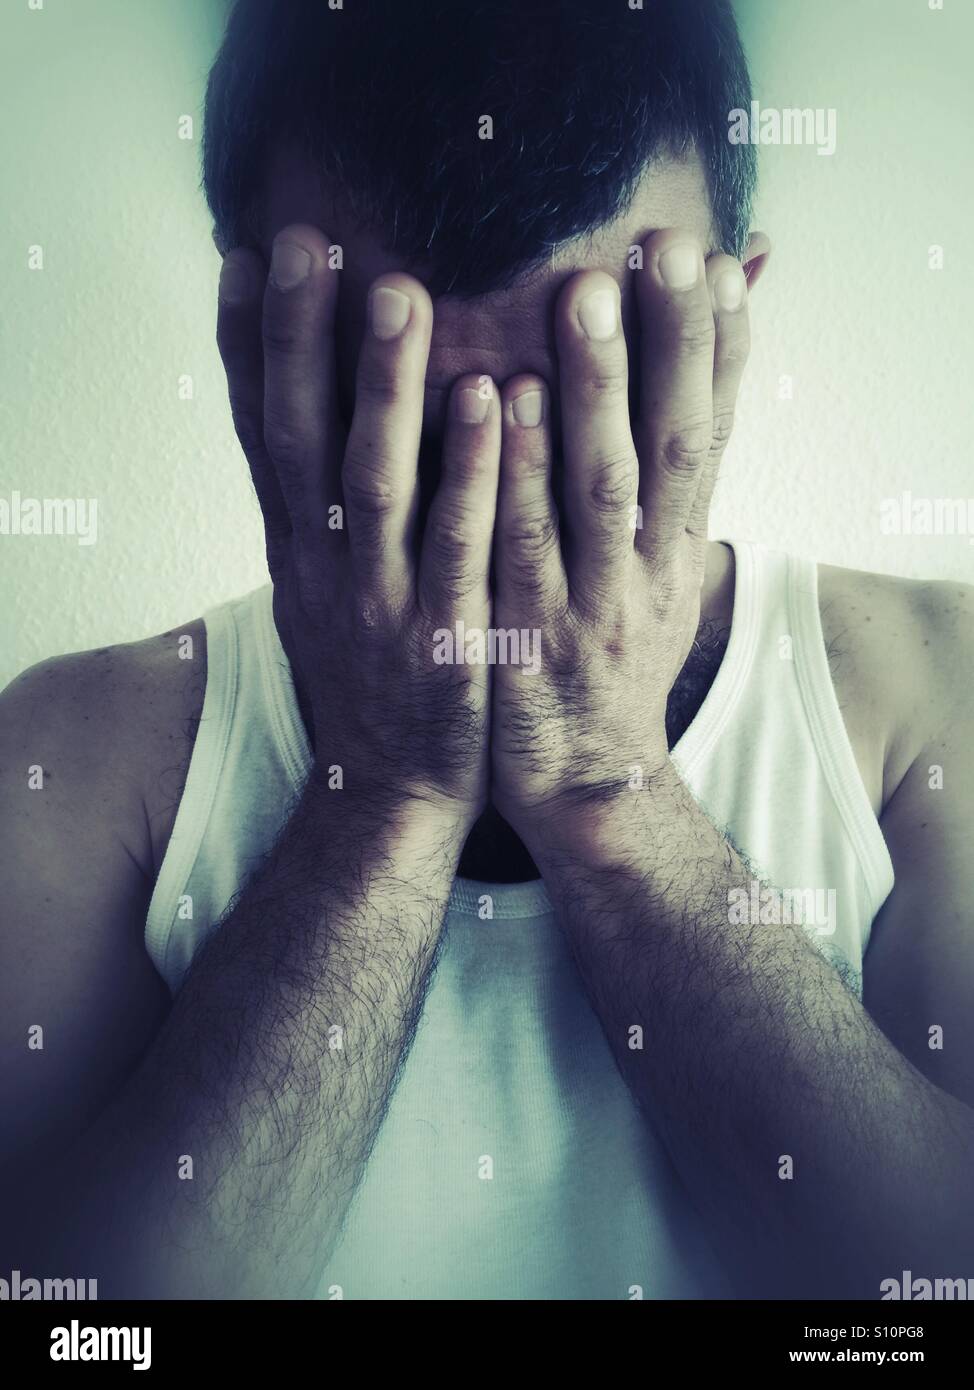 Man hiding his face with his hands Stock Photo